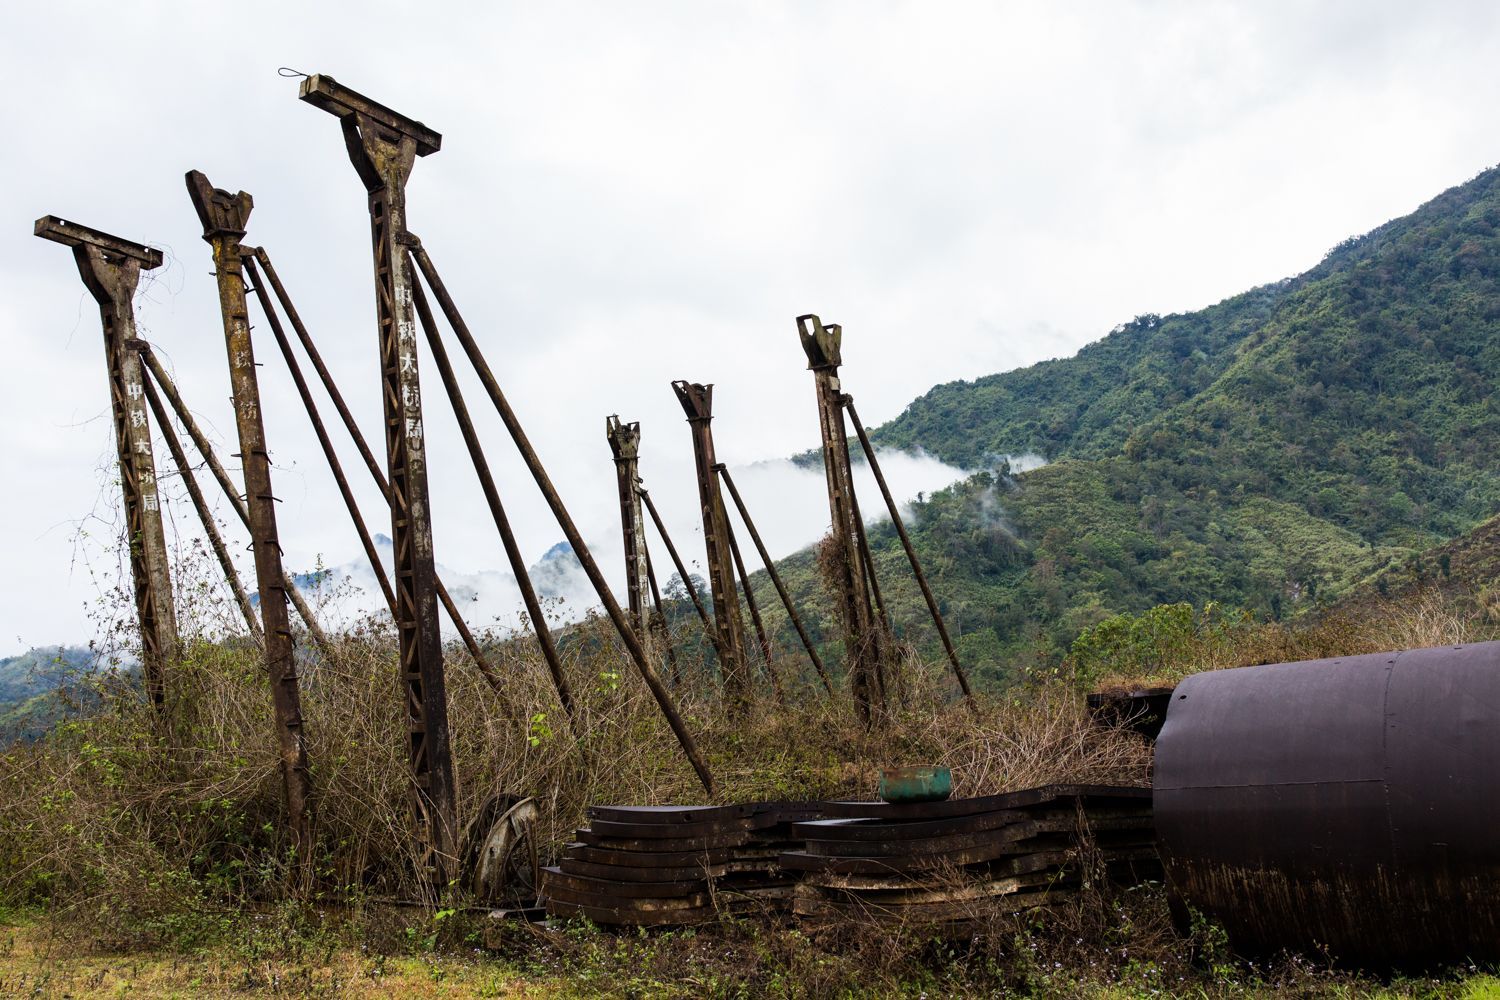 Old and unused materials left by Chinese workers from the Chipwi dam project. The materials were left after fighting resumed in Chipwi, Kachin State, Myanmar. Image by Hkun Lat. Myanmar, 2019.